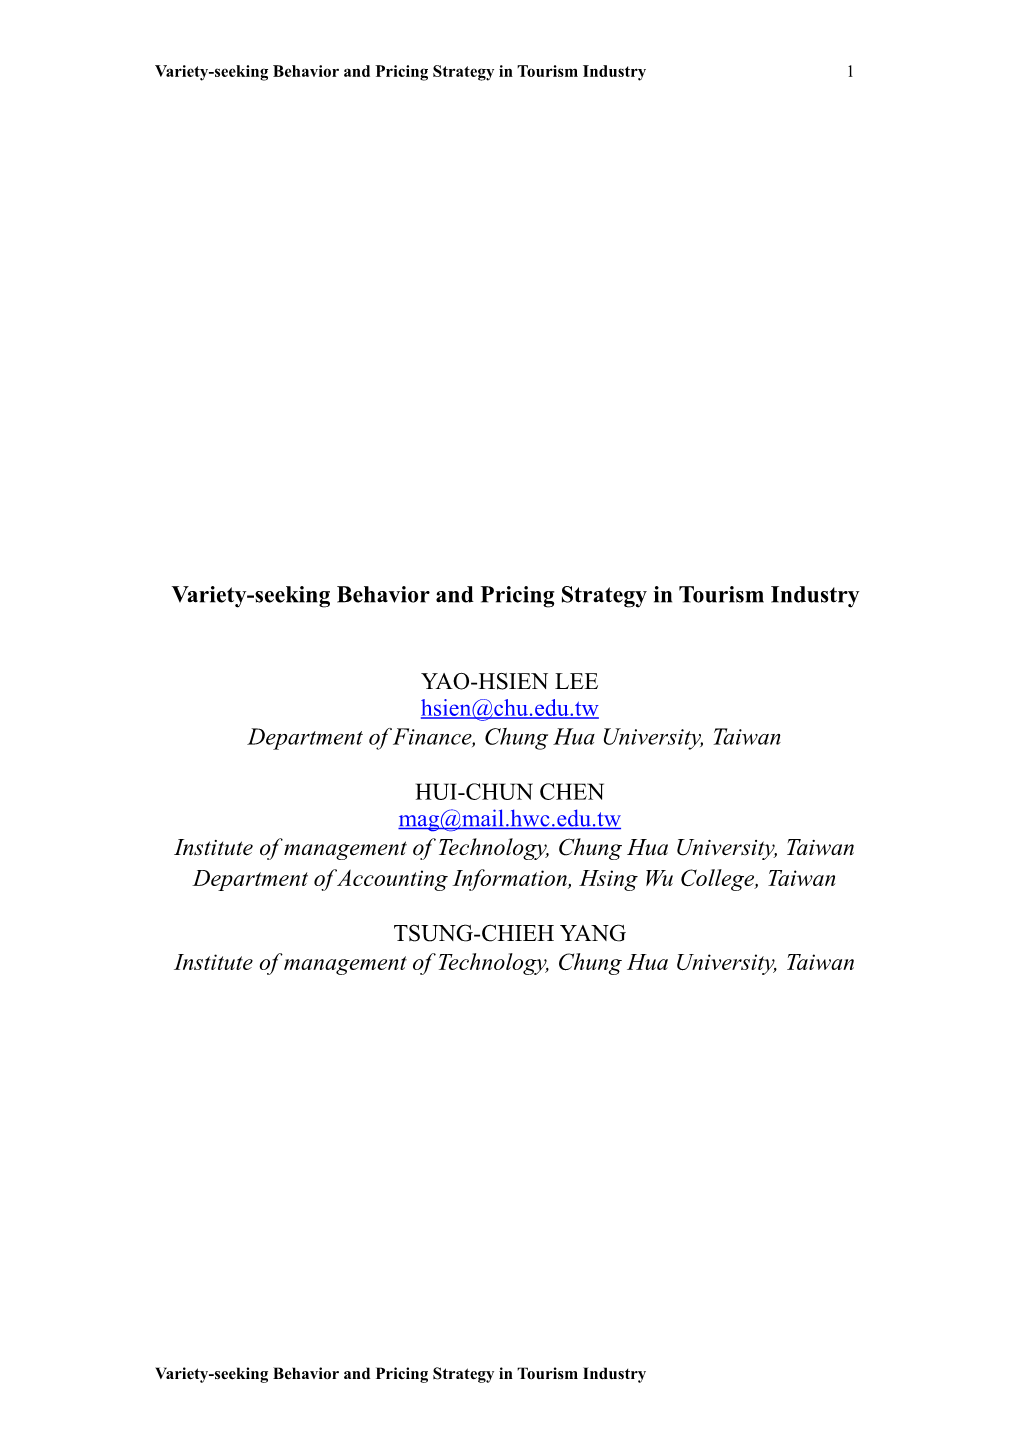 Variety-Seeking Behavior, Pricing Strategy, and Social Welfare in Tourism Industry